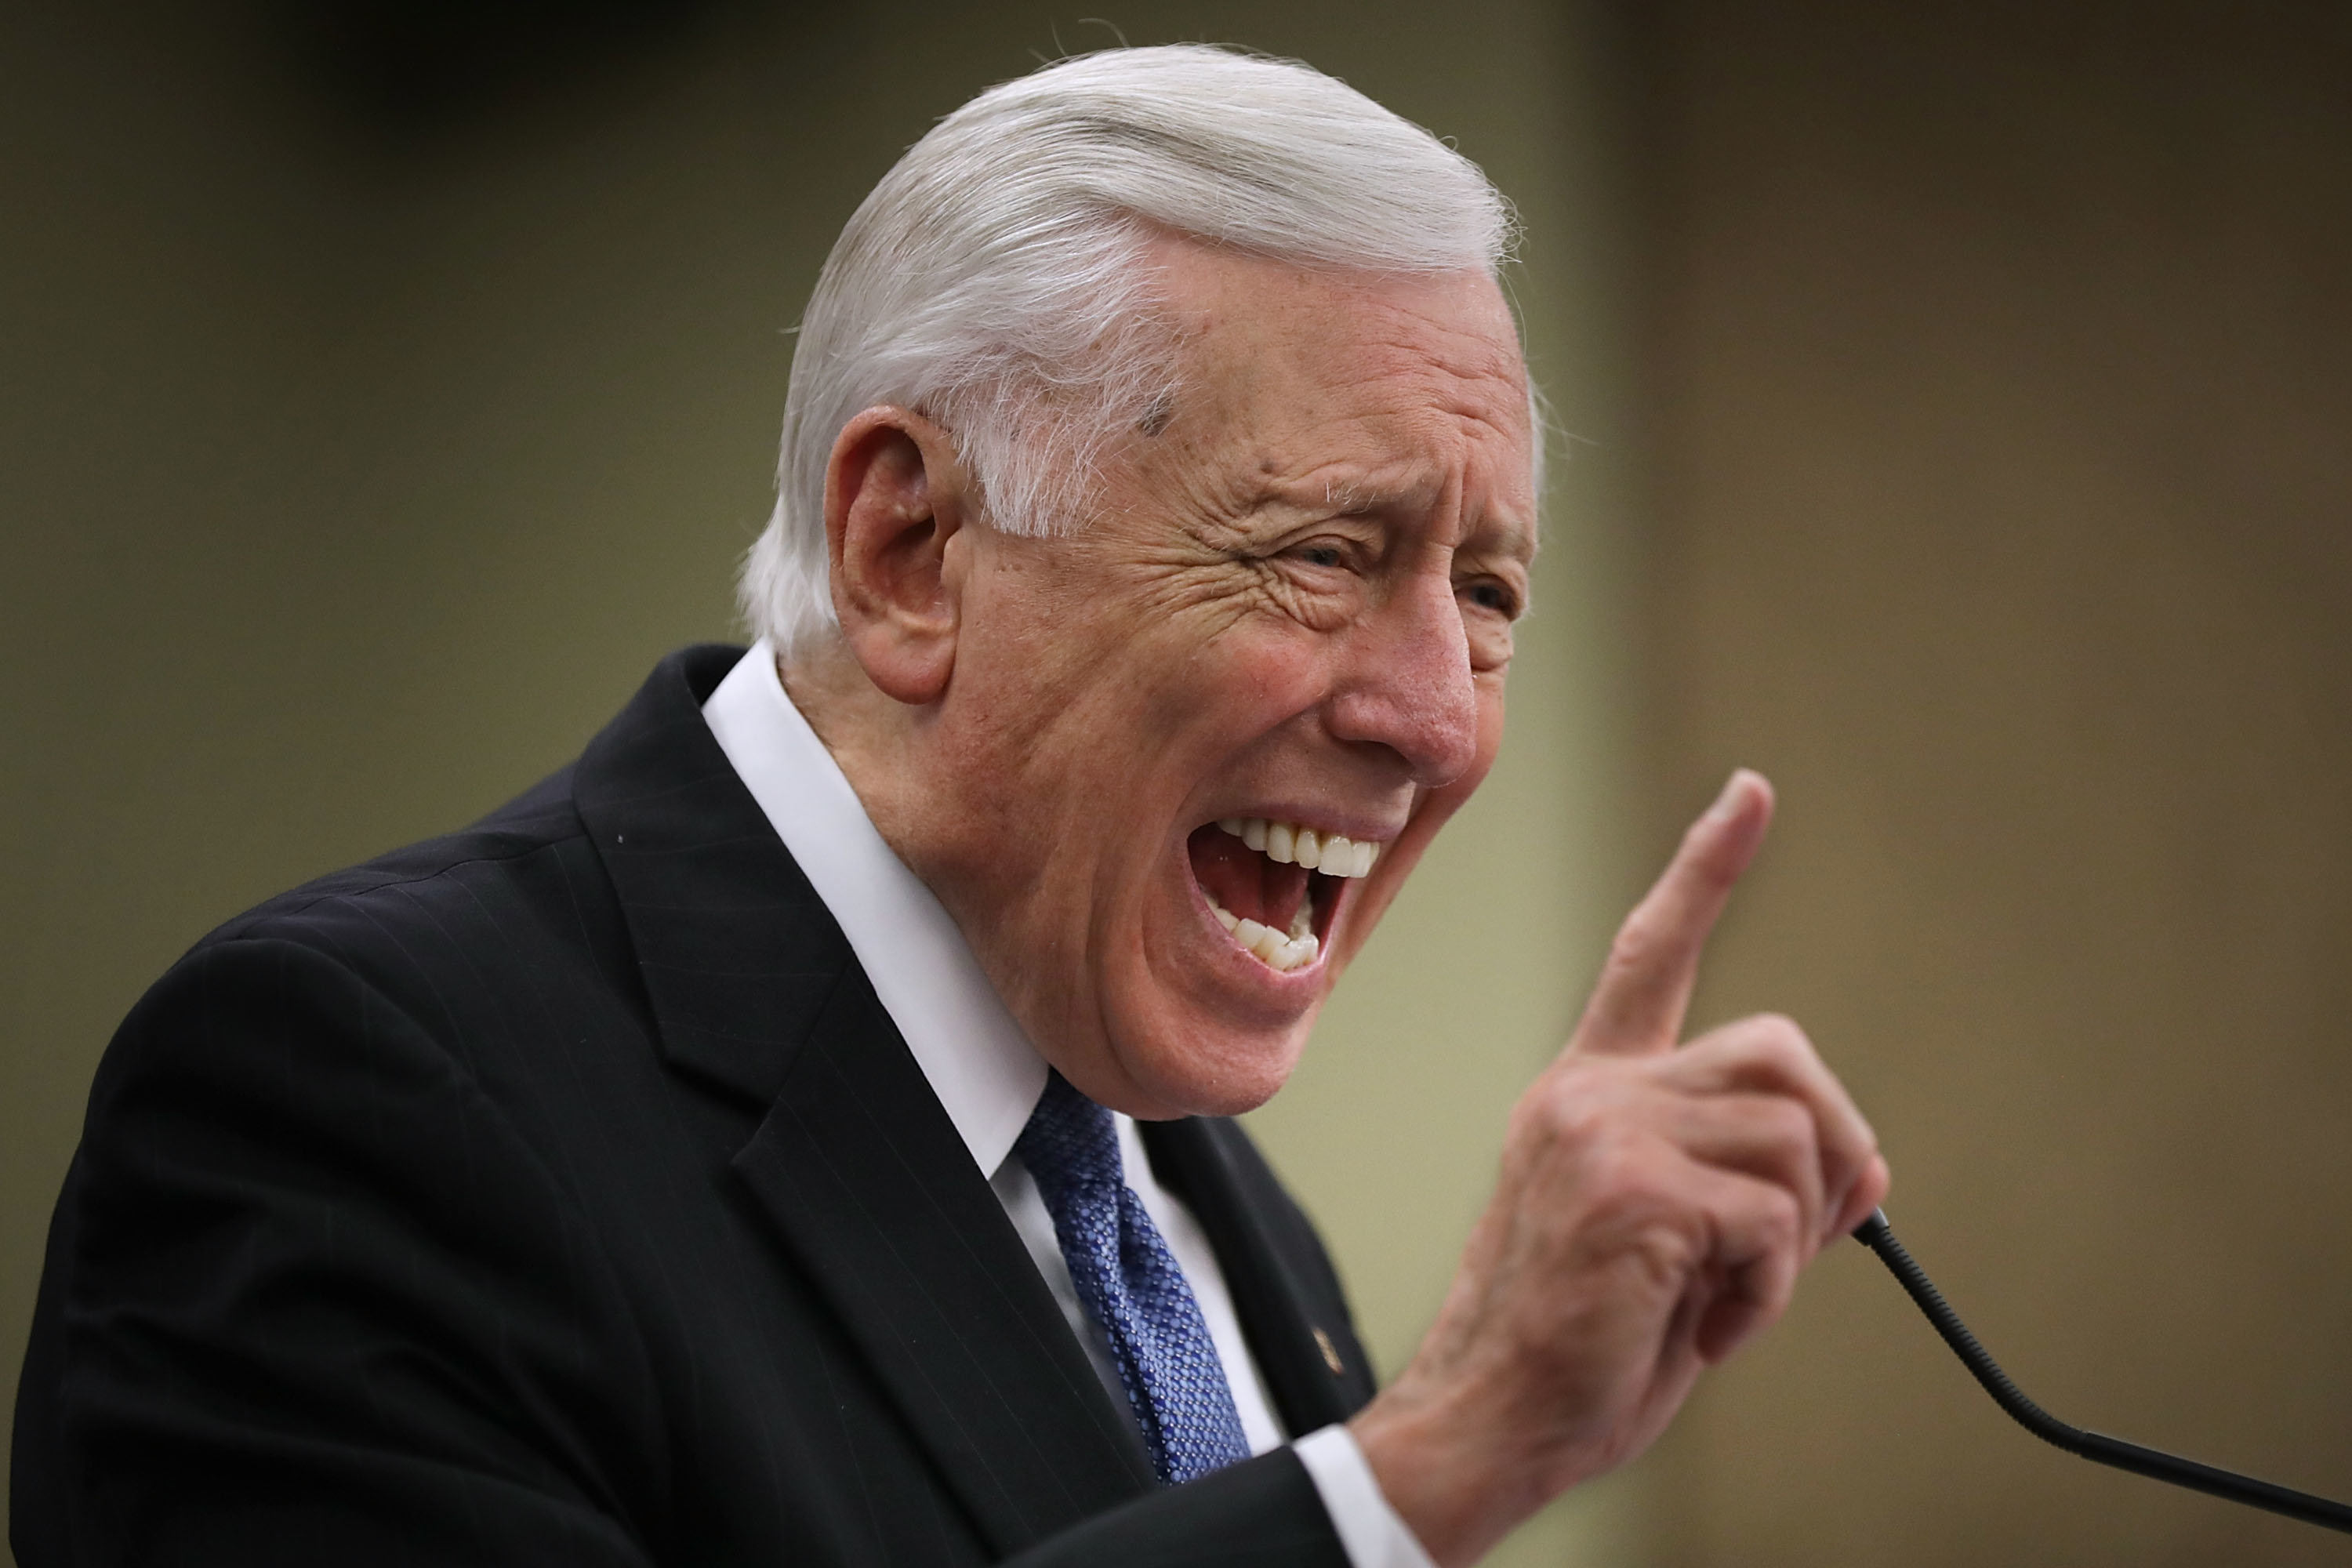 House Majority Leader Steny Hoyer admits walls work, says they're not